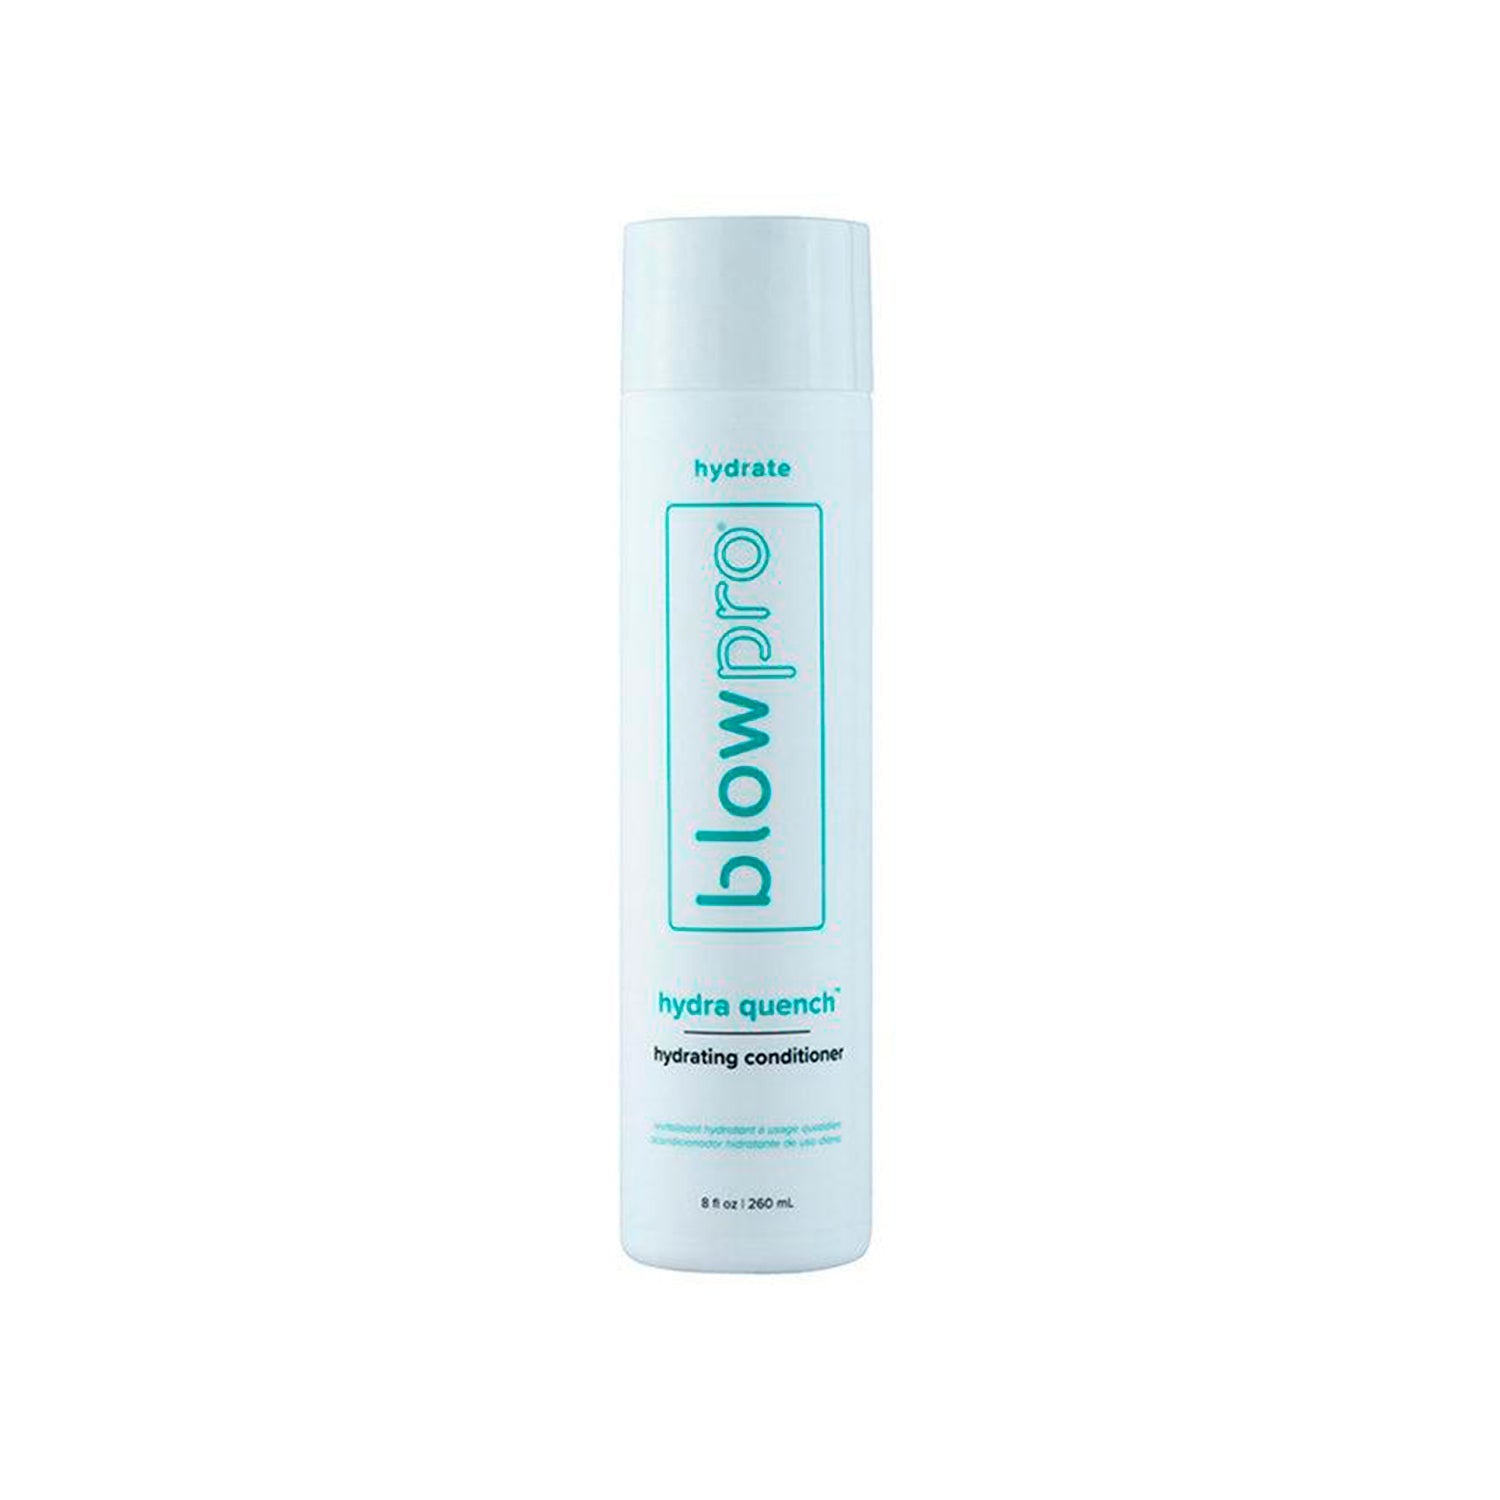 Blowpro Hydra Quench Hydrating Conditioner